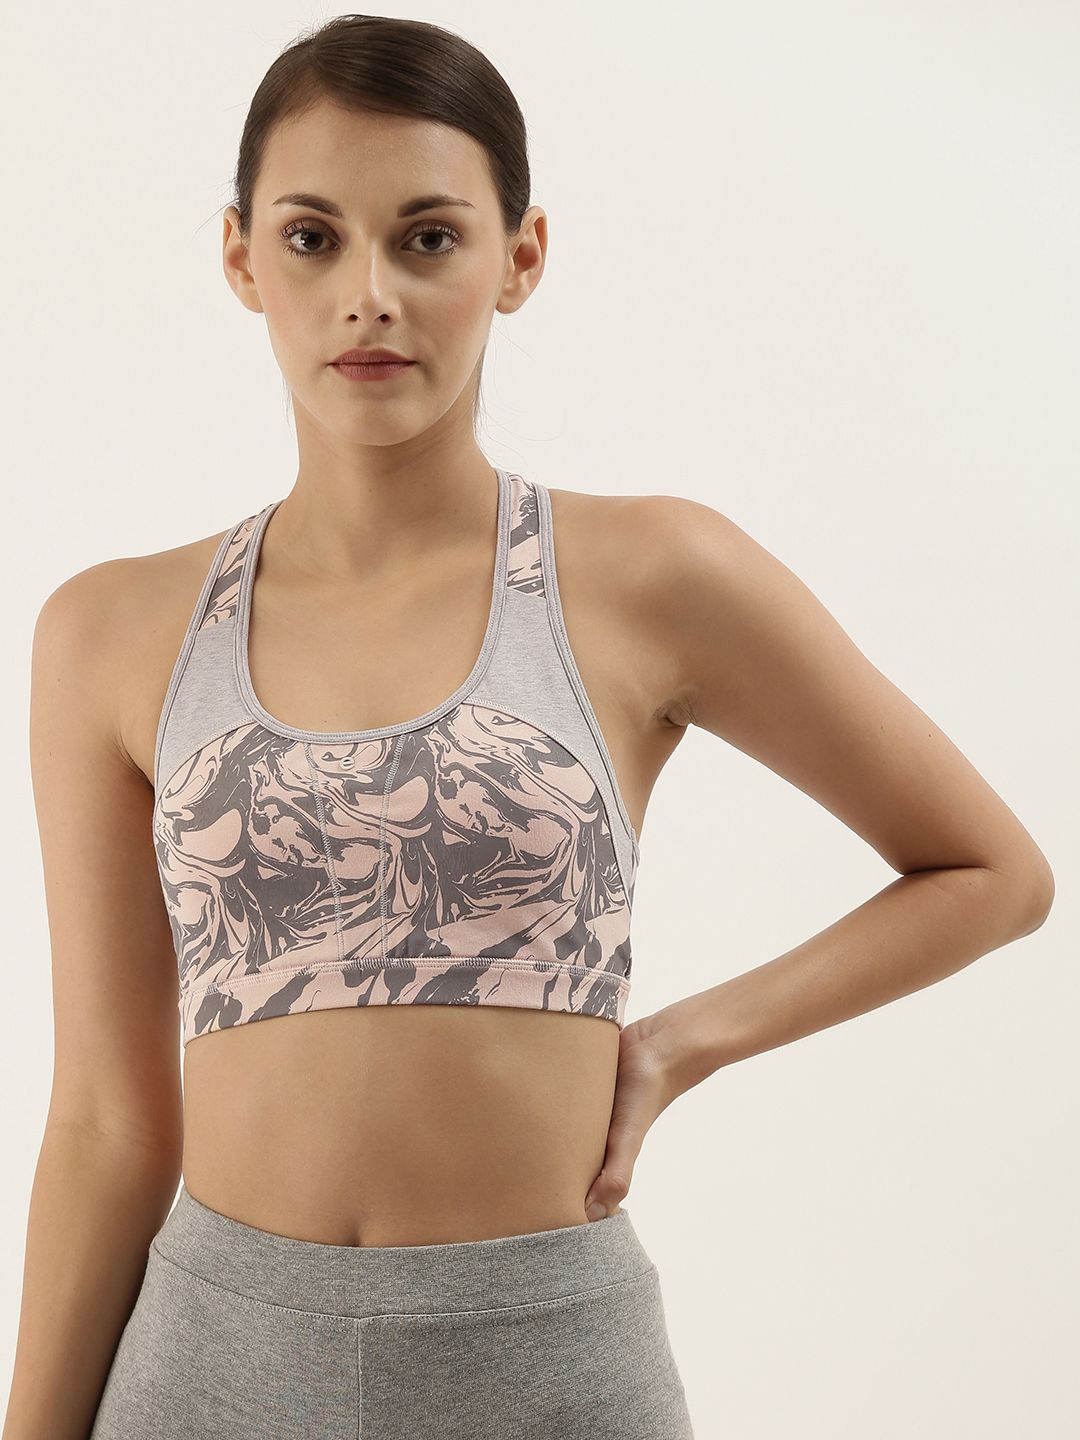 Enamor Pink Grey Printed Non-Wired Removable Pads High Coverage Medium Impact Sports Bra SB08 Price in India